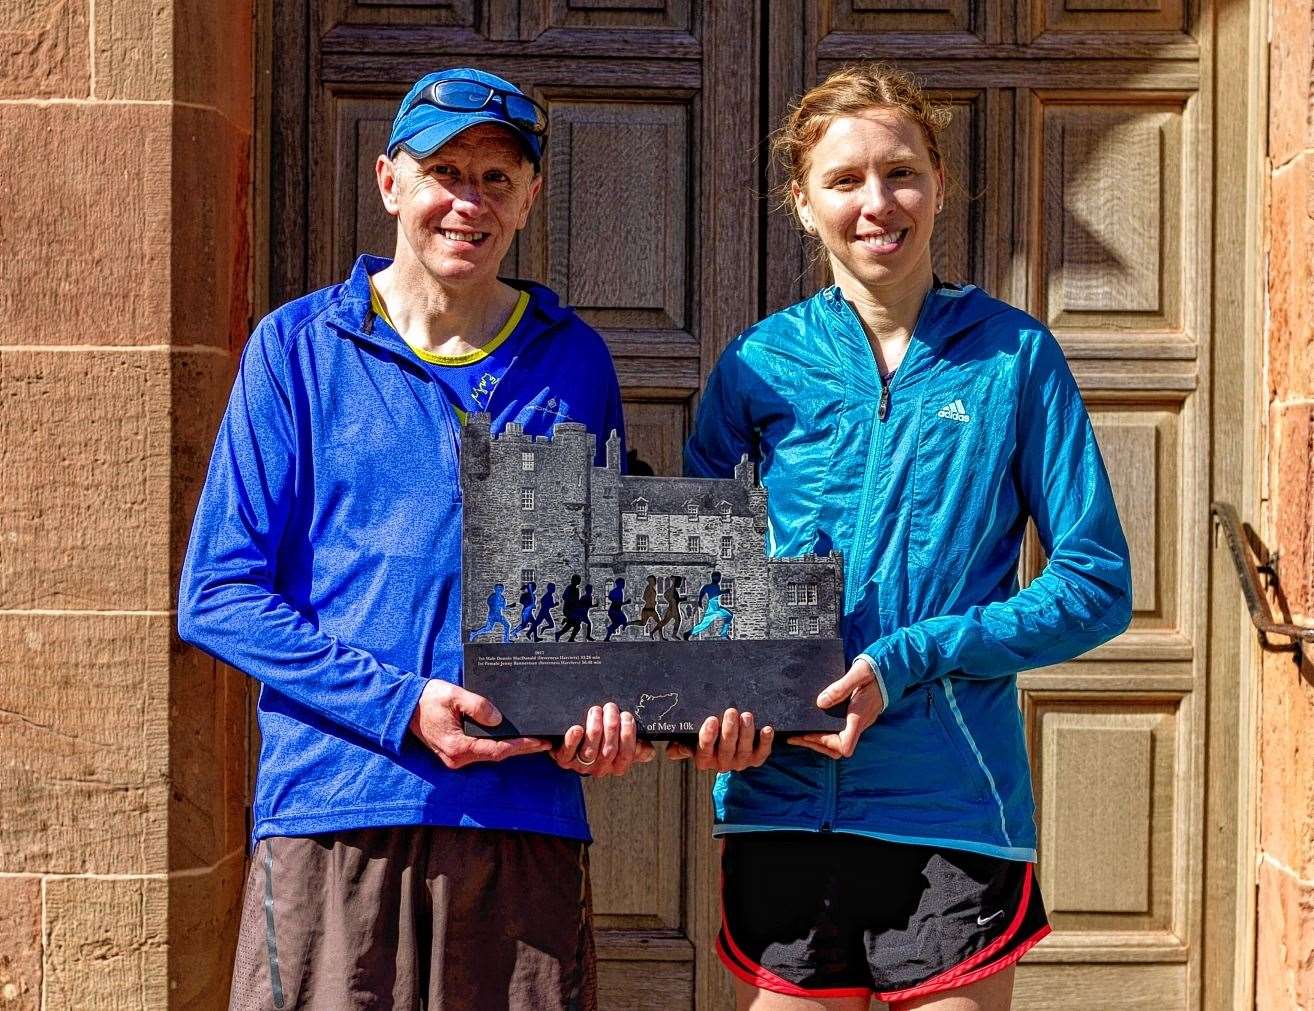 The 2018 Castle of Mey 10k winners Kevin Cormack and Rhona Grant.